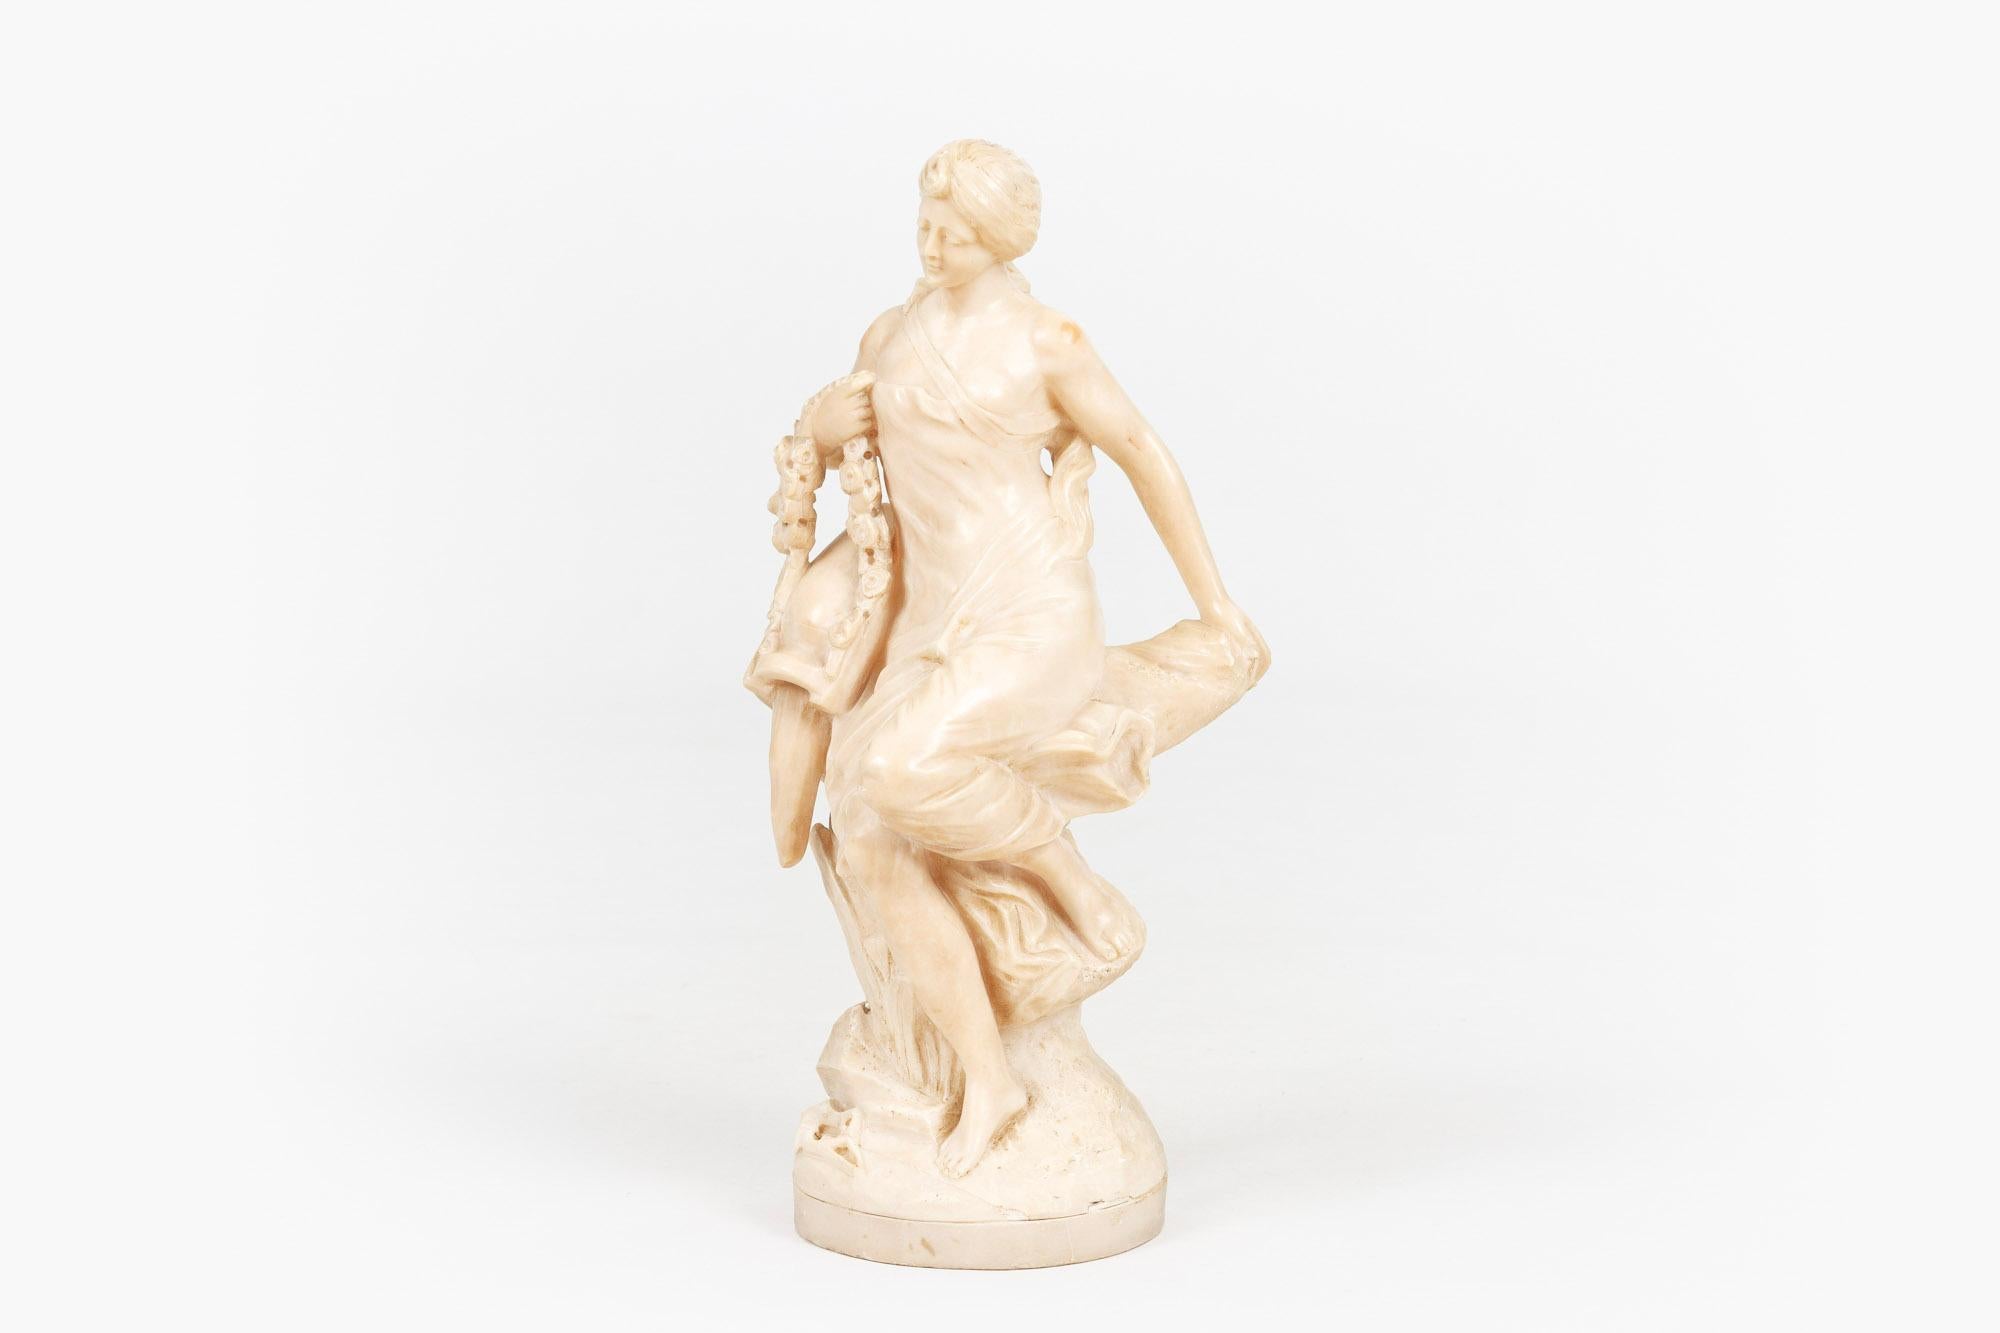 19th century neoclassical statuary figure sculpture by Edward Drouot depicting female figure seated
on a rock with urn flowing water and garland of foliate motif.